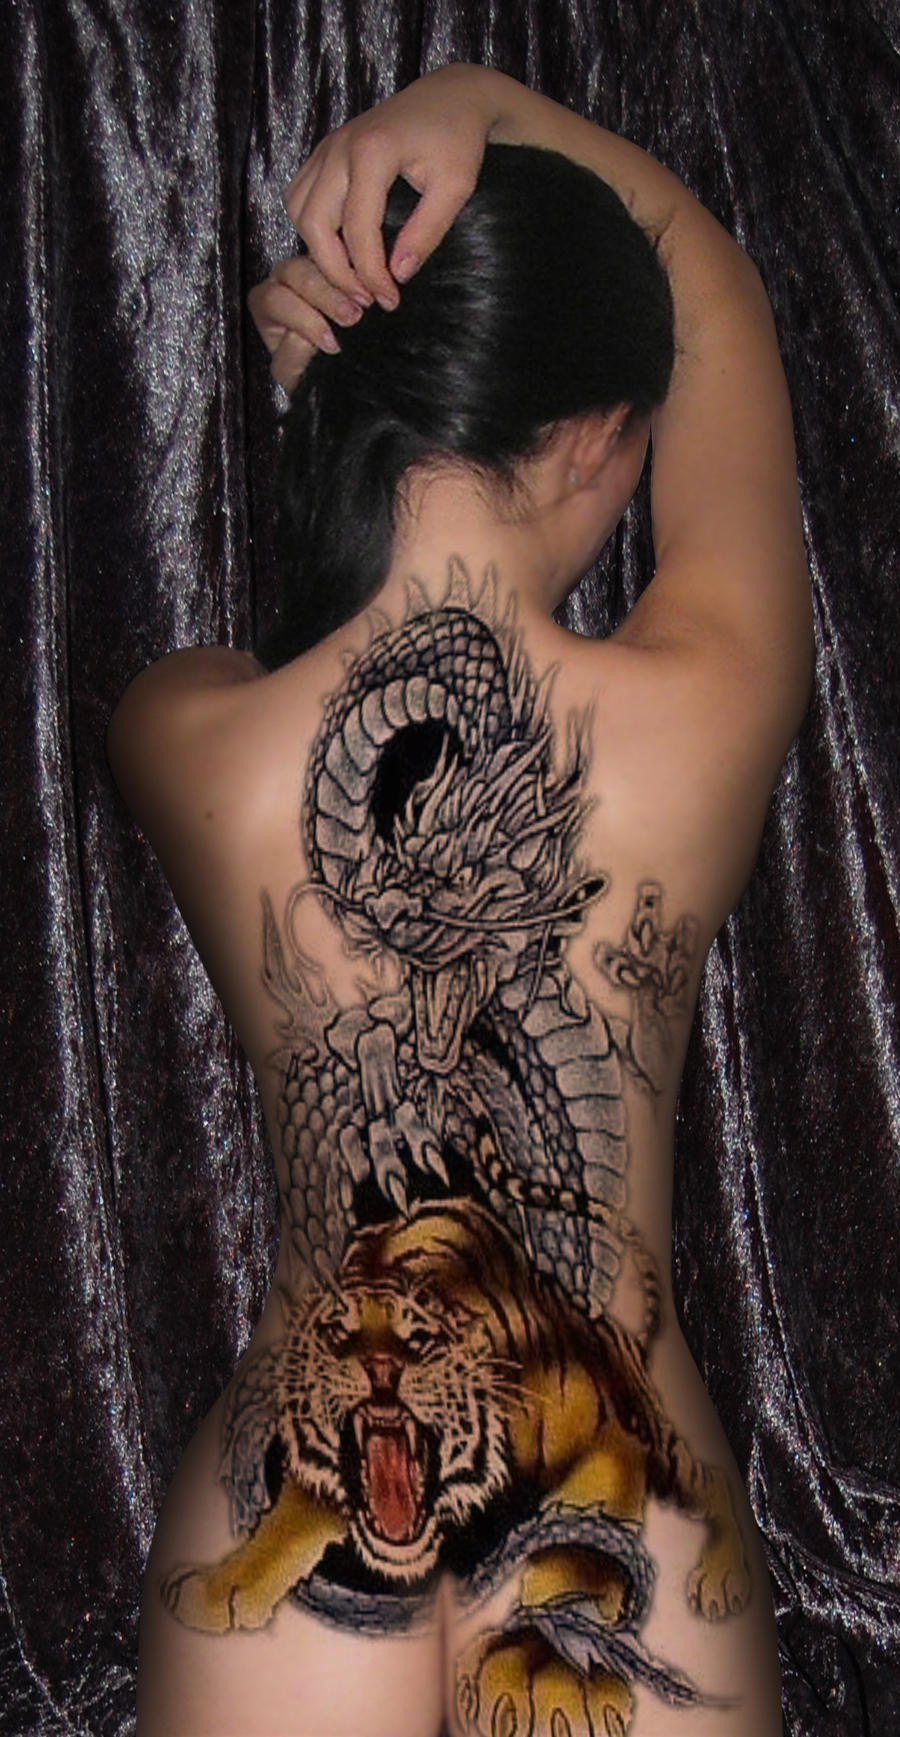 Tattoo Dragon and Tiger by